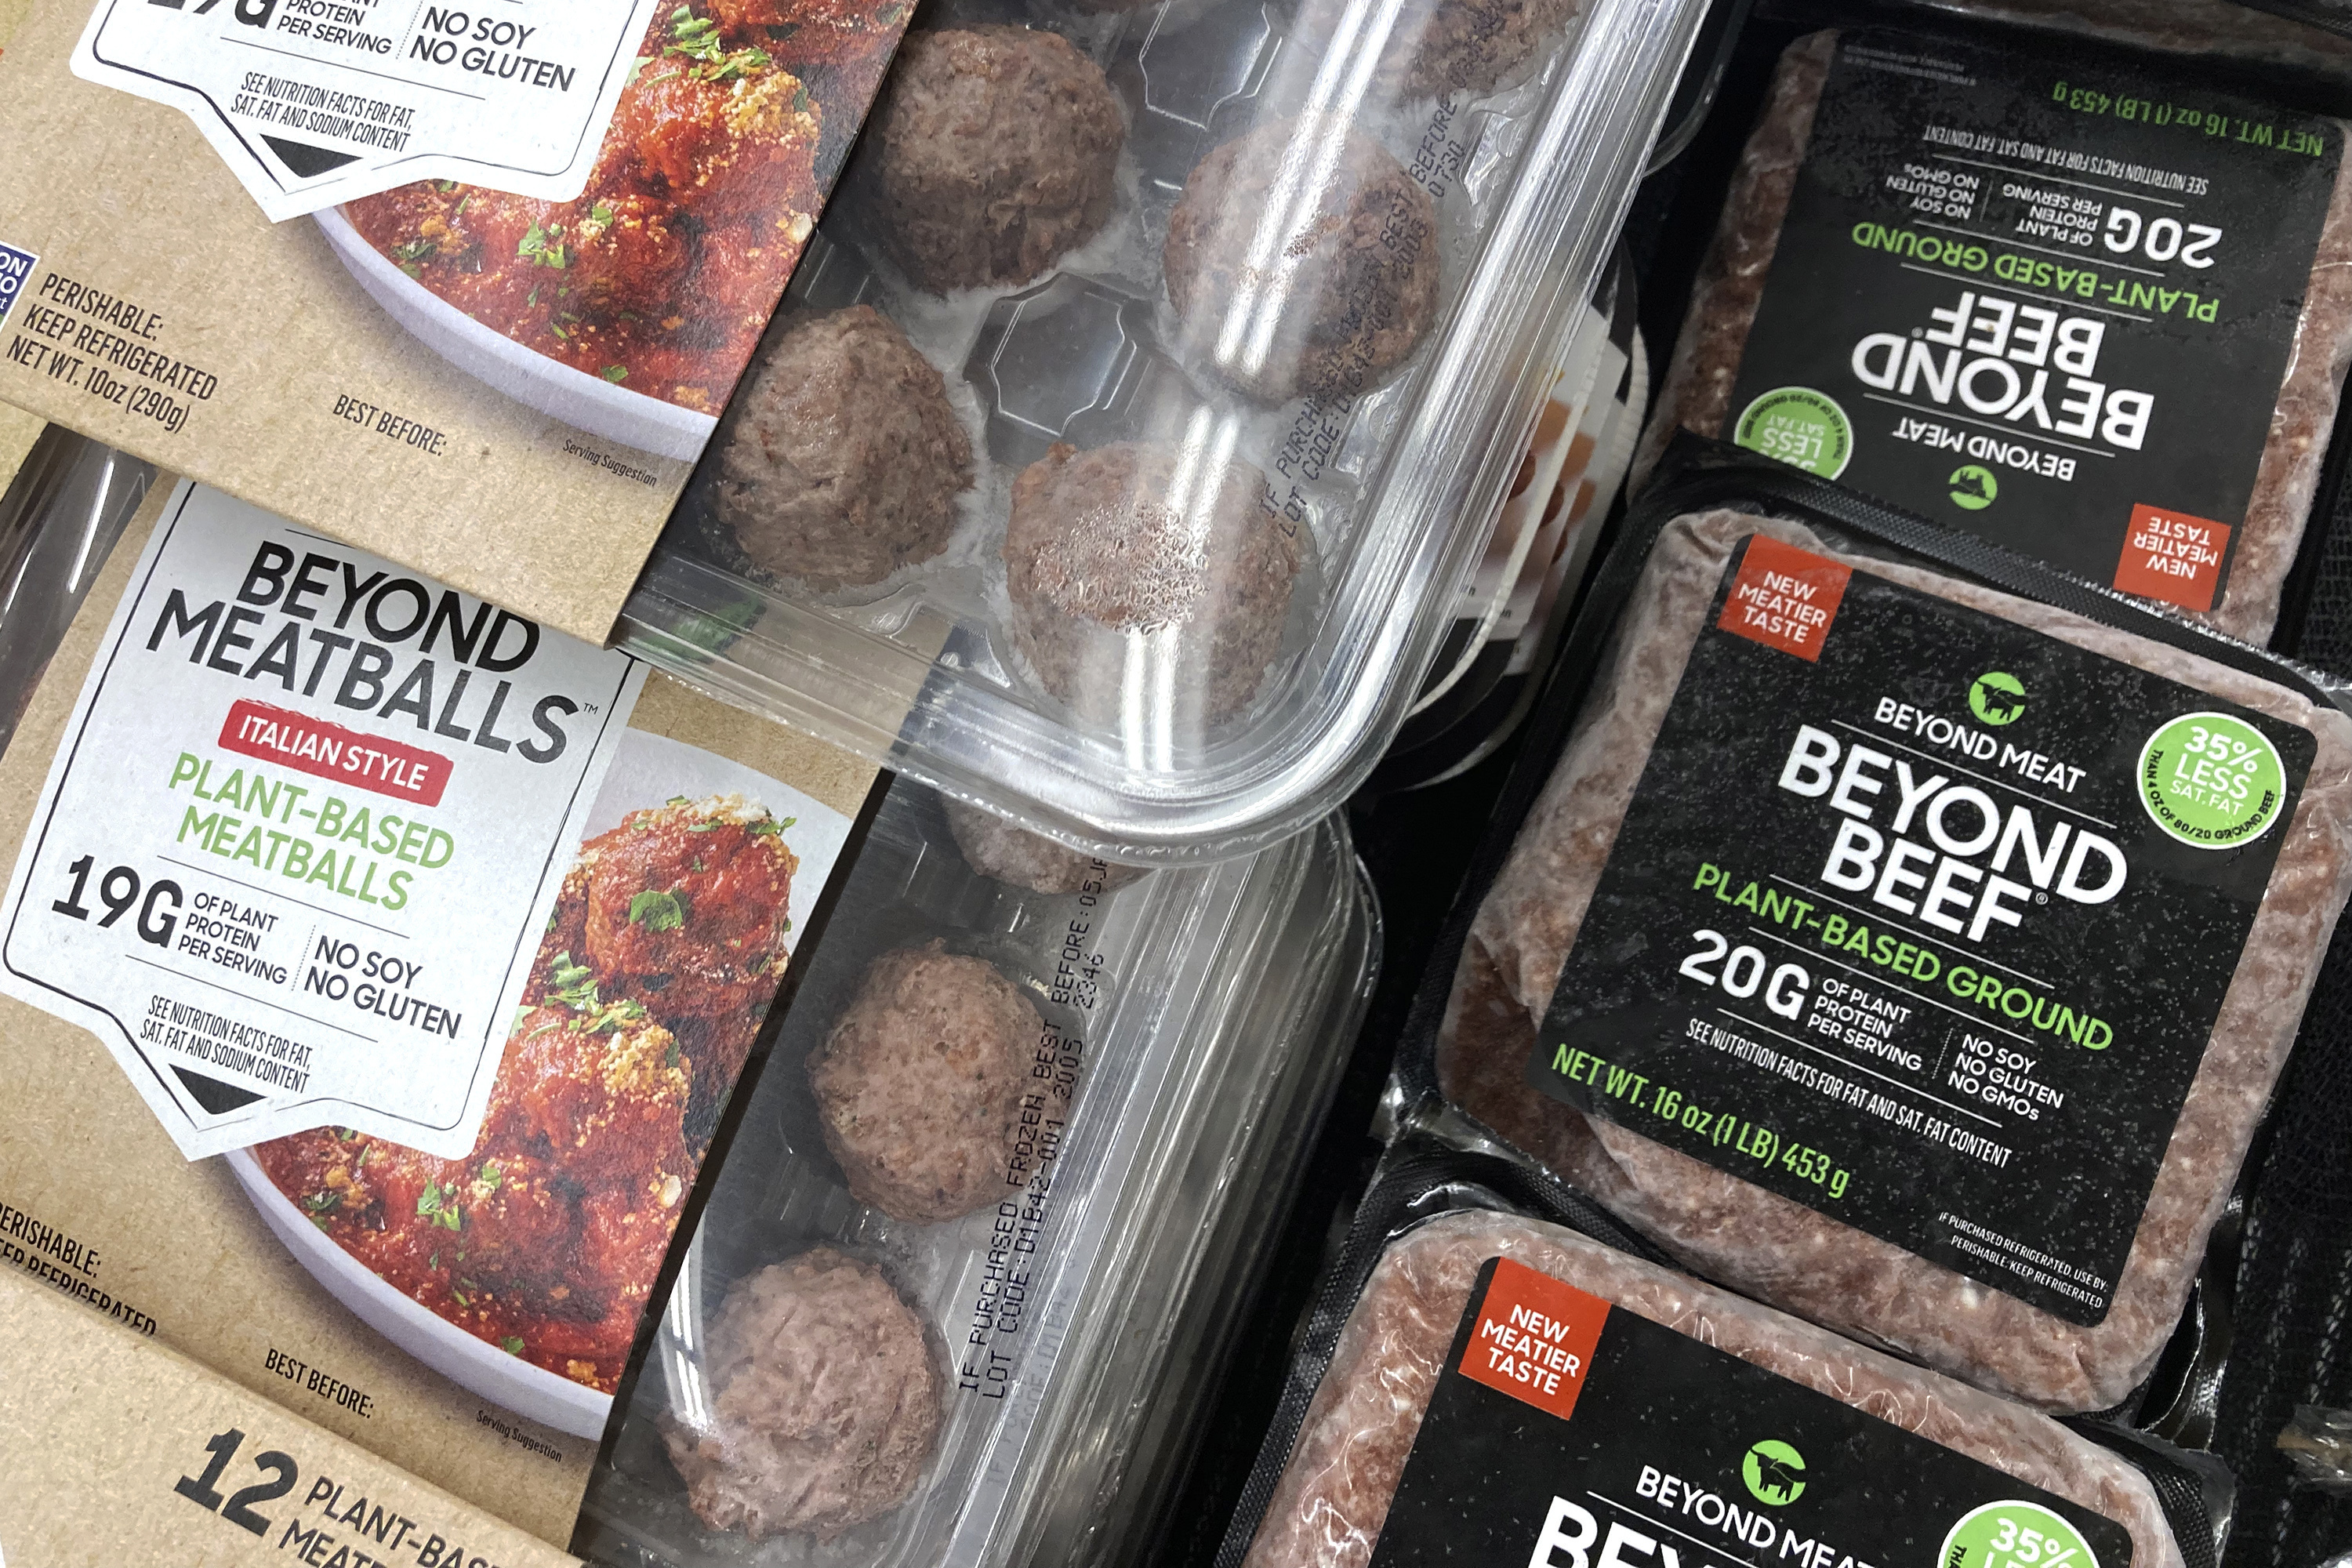 FILE - Beyond Meat products are seen in a refrigerated case inside a grocery store in Mount Prospect, Ill., Saturday, Feb. 19, 2022.  On Wednesday, May 11, 2022, the plant-based meat company reported lower-than-expected sales in the first quarter as it slashed prices and demand from restaurants fell. (AP Photo/Nam Y. Huh, File)